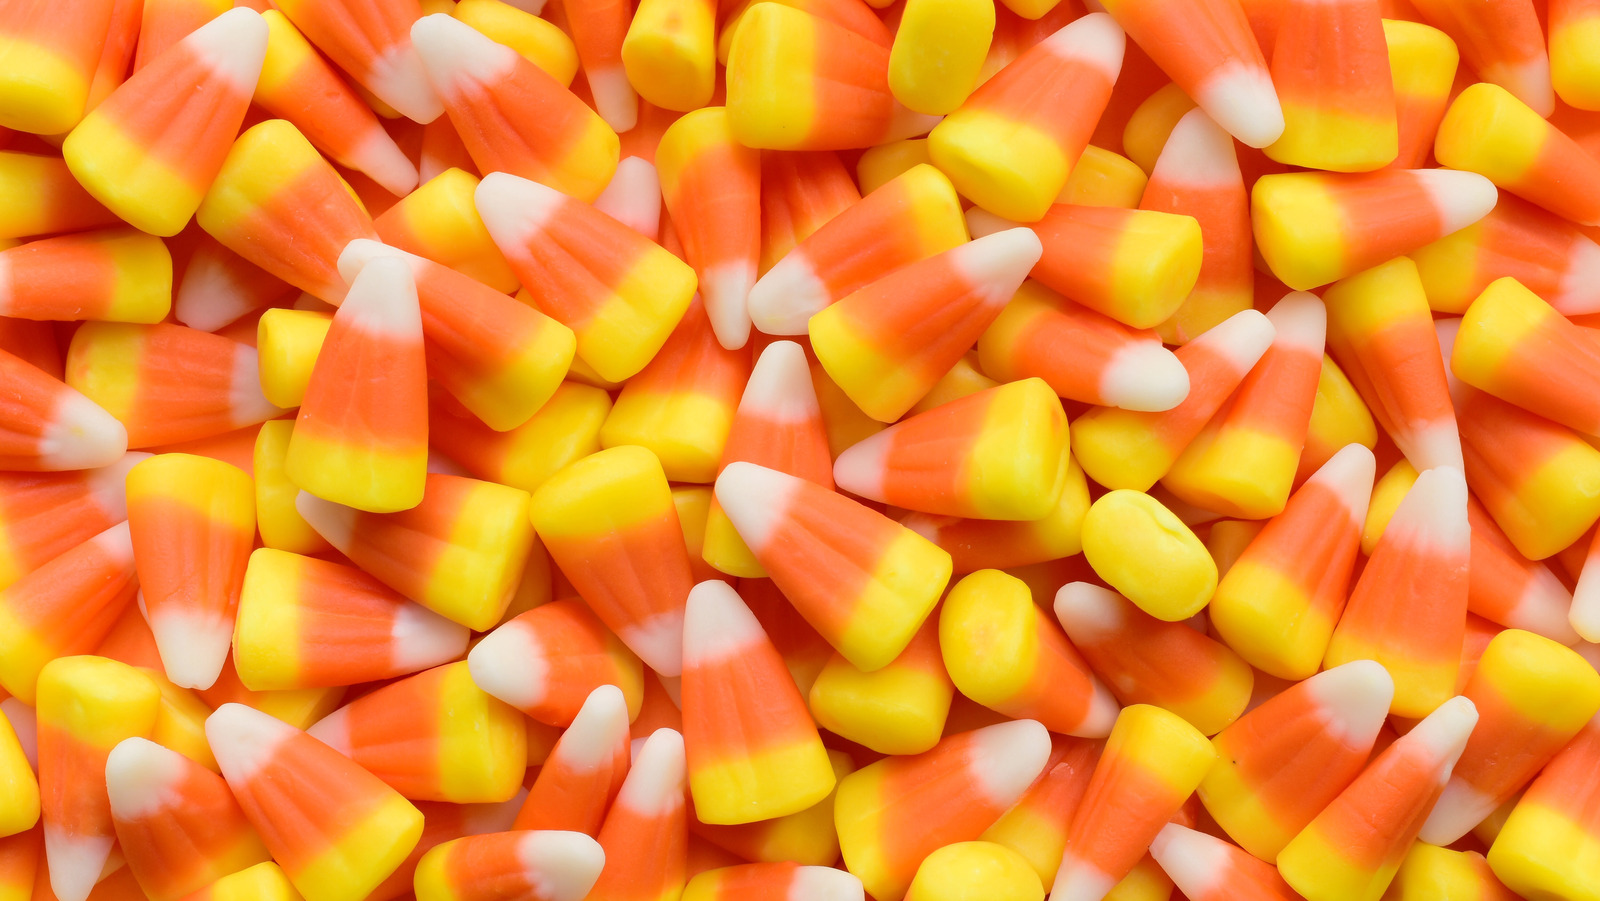 Brach's Candy Corn - Product Review Cafe